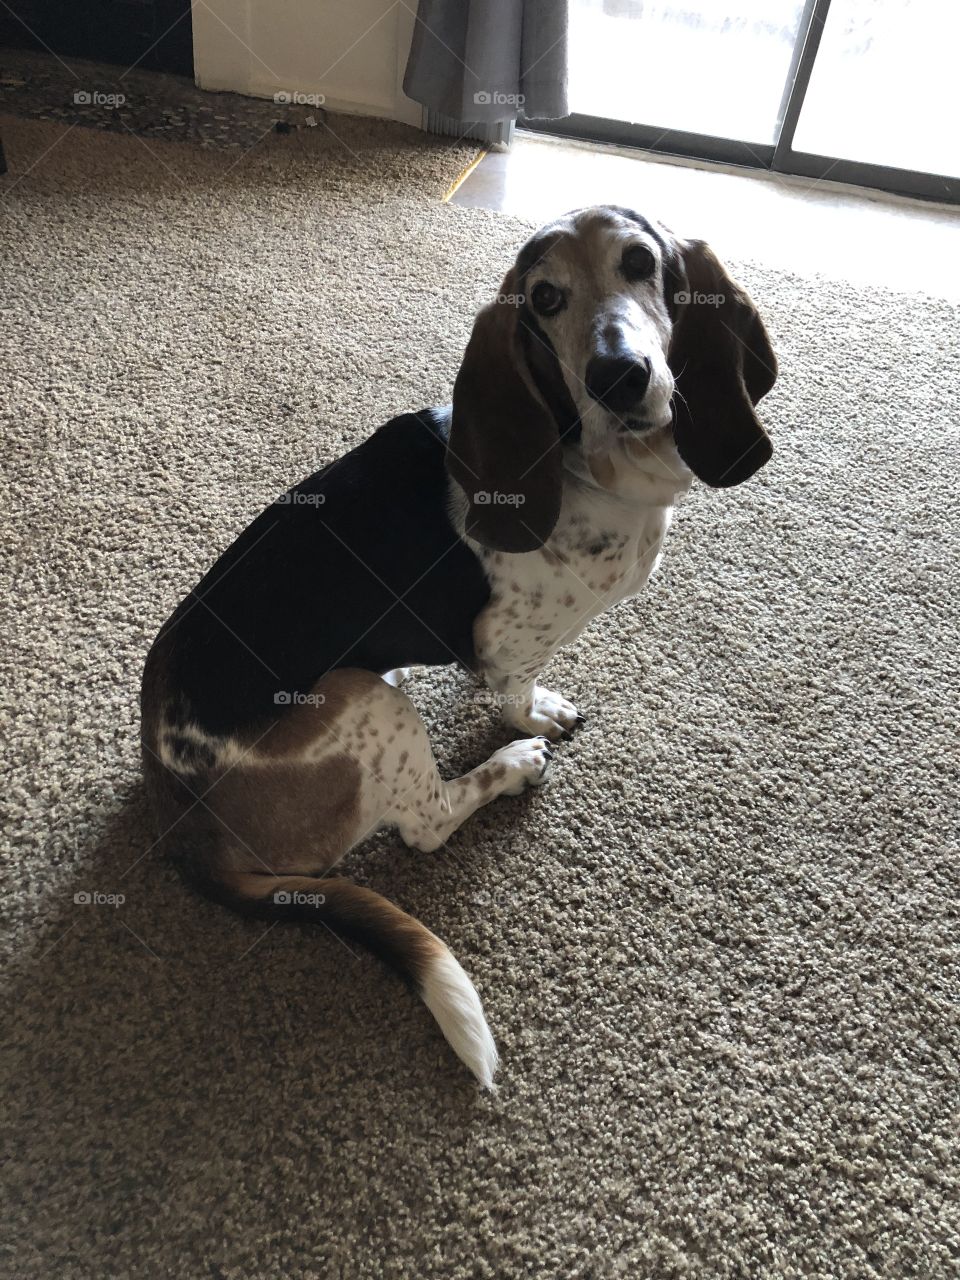 Basset hound is very intrigued and poses for a snack